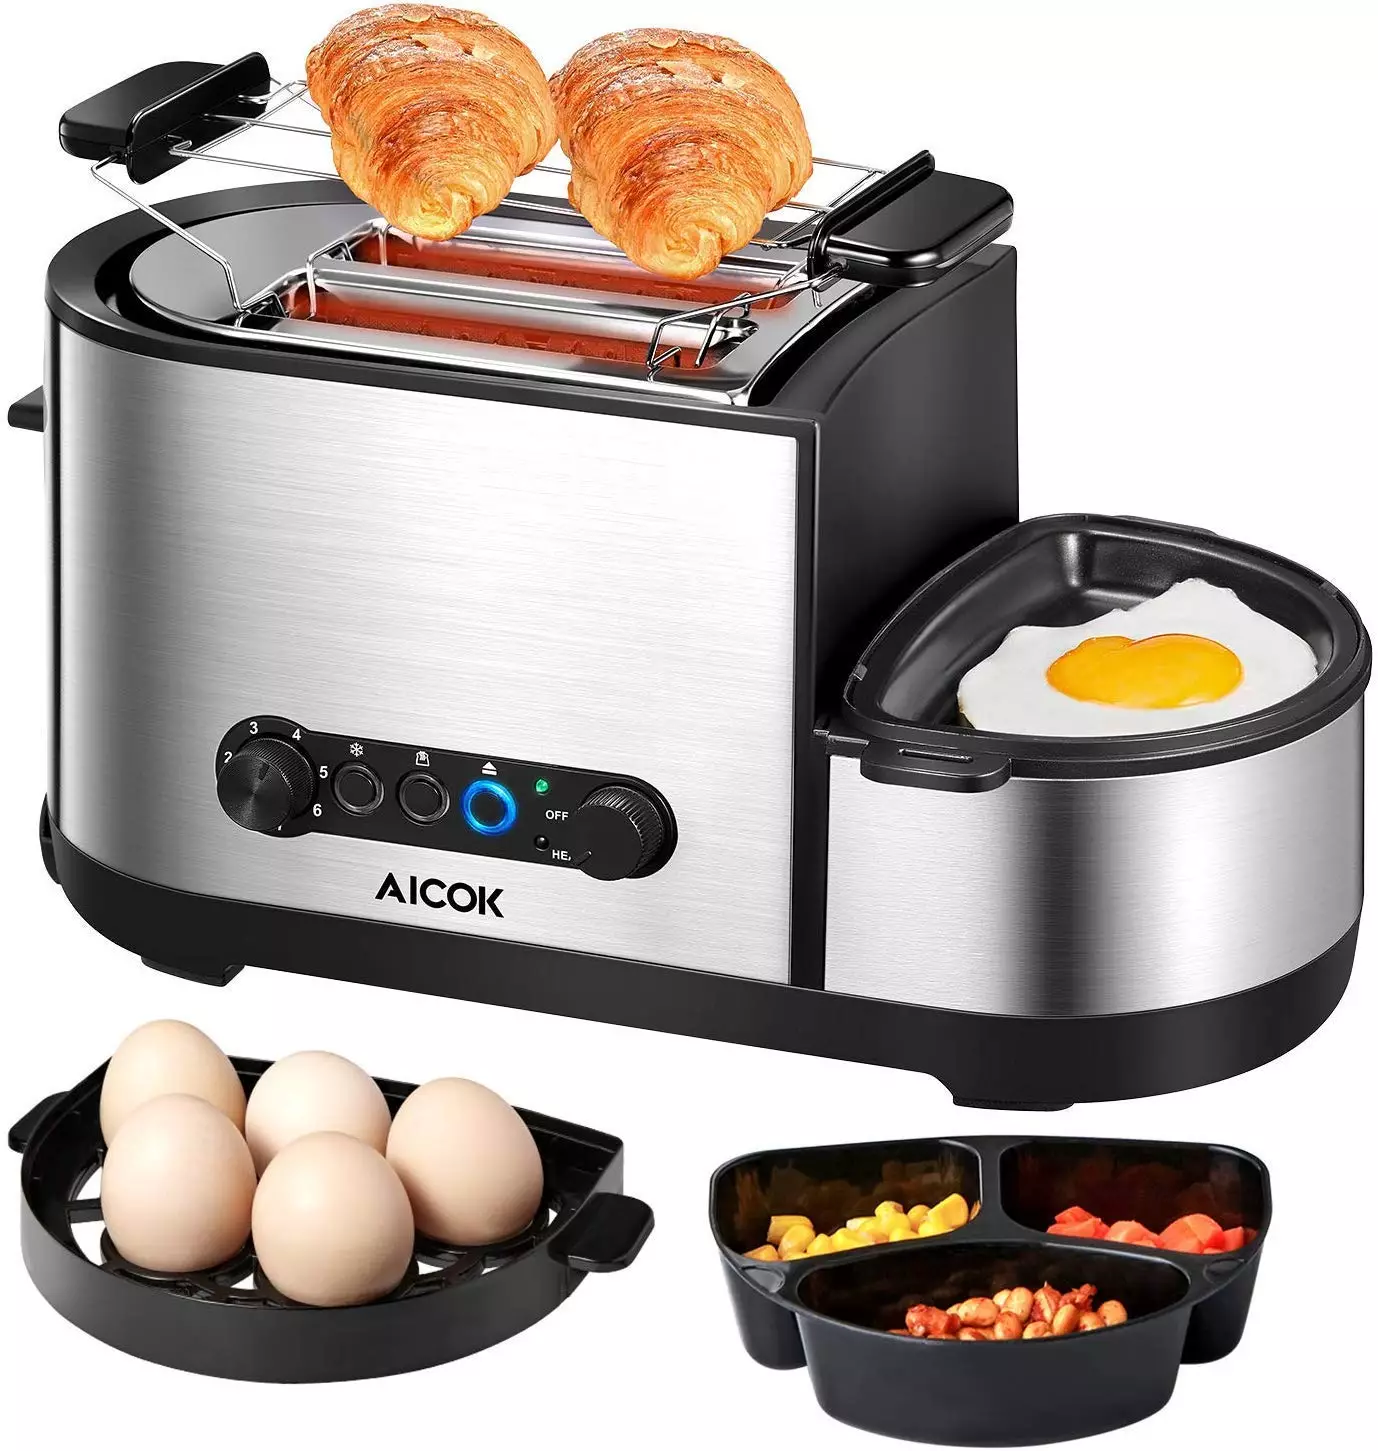 The Aicok product is a 5-in-1 breakfast maker and is £42.99 (